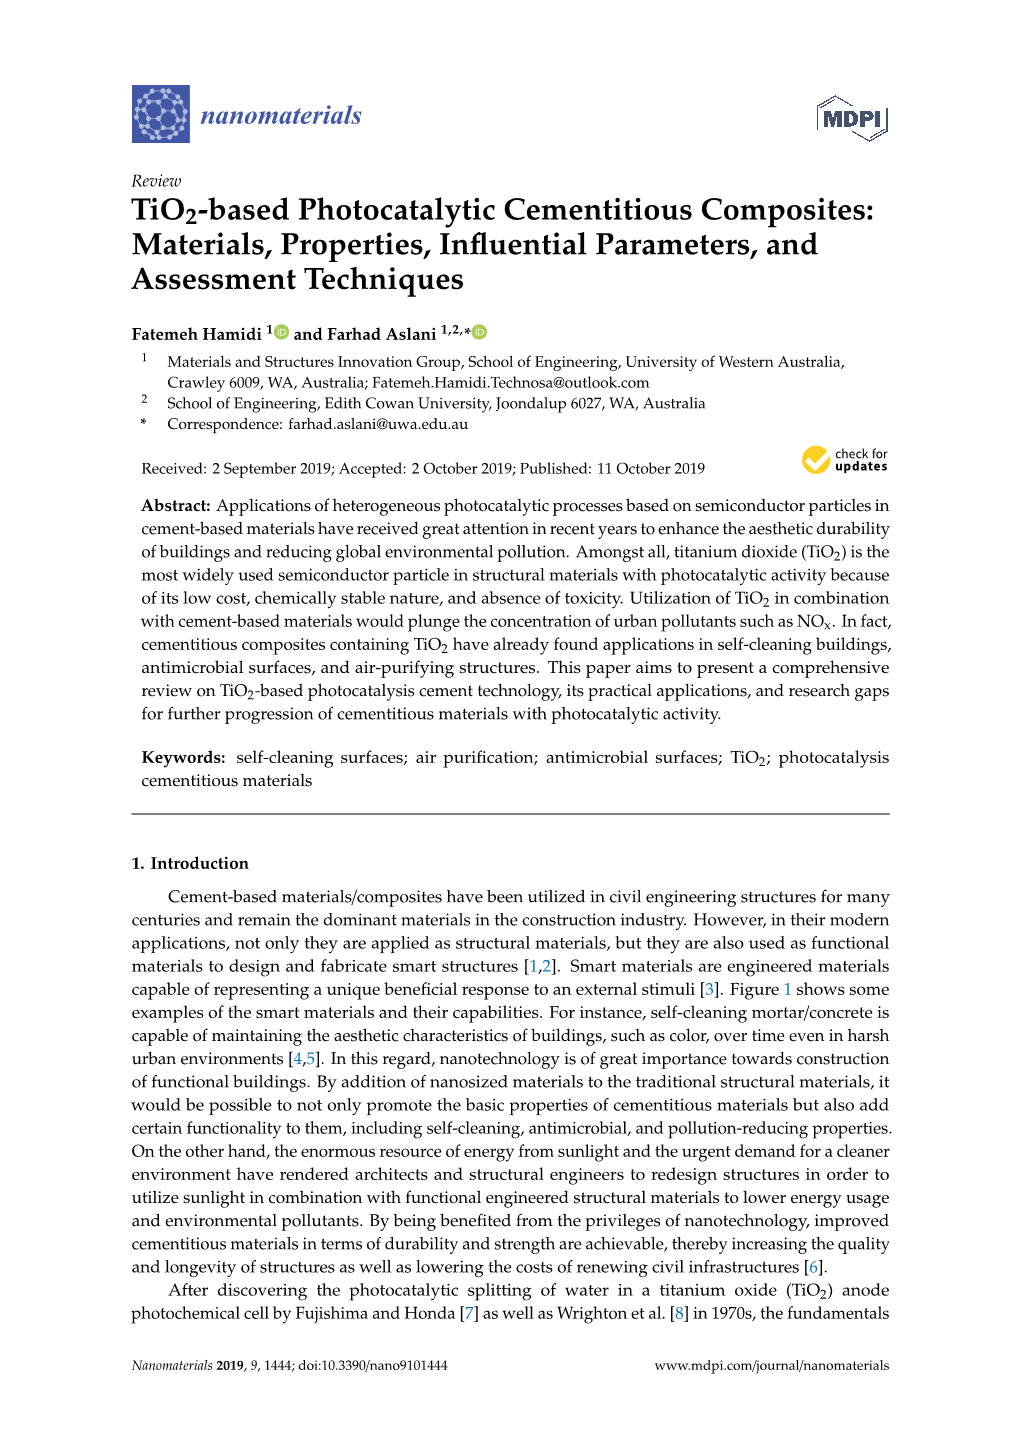 Tio2-Based Photocatalytic Cementitious Composites: Materials, Properties, Inﬂuential Parameters, and Assessment Techniques